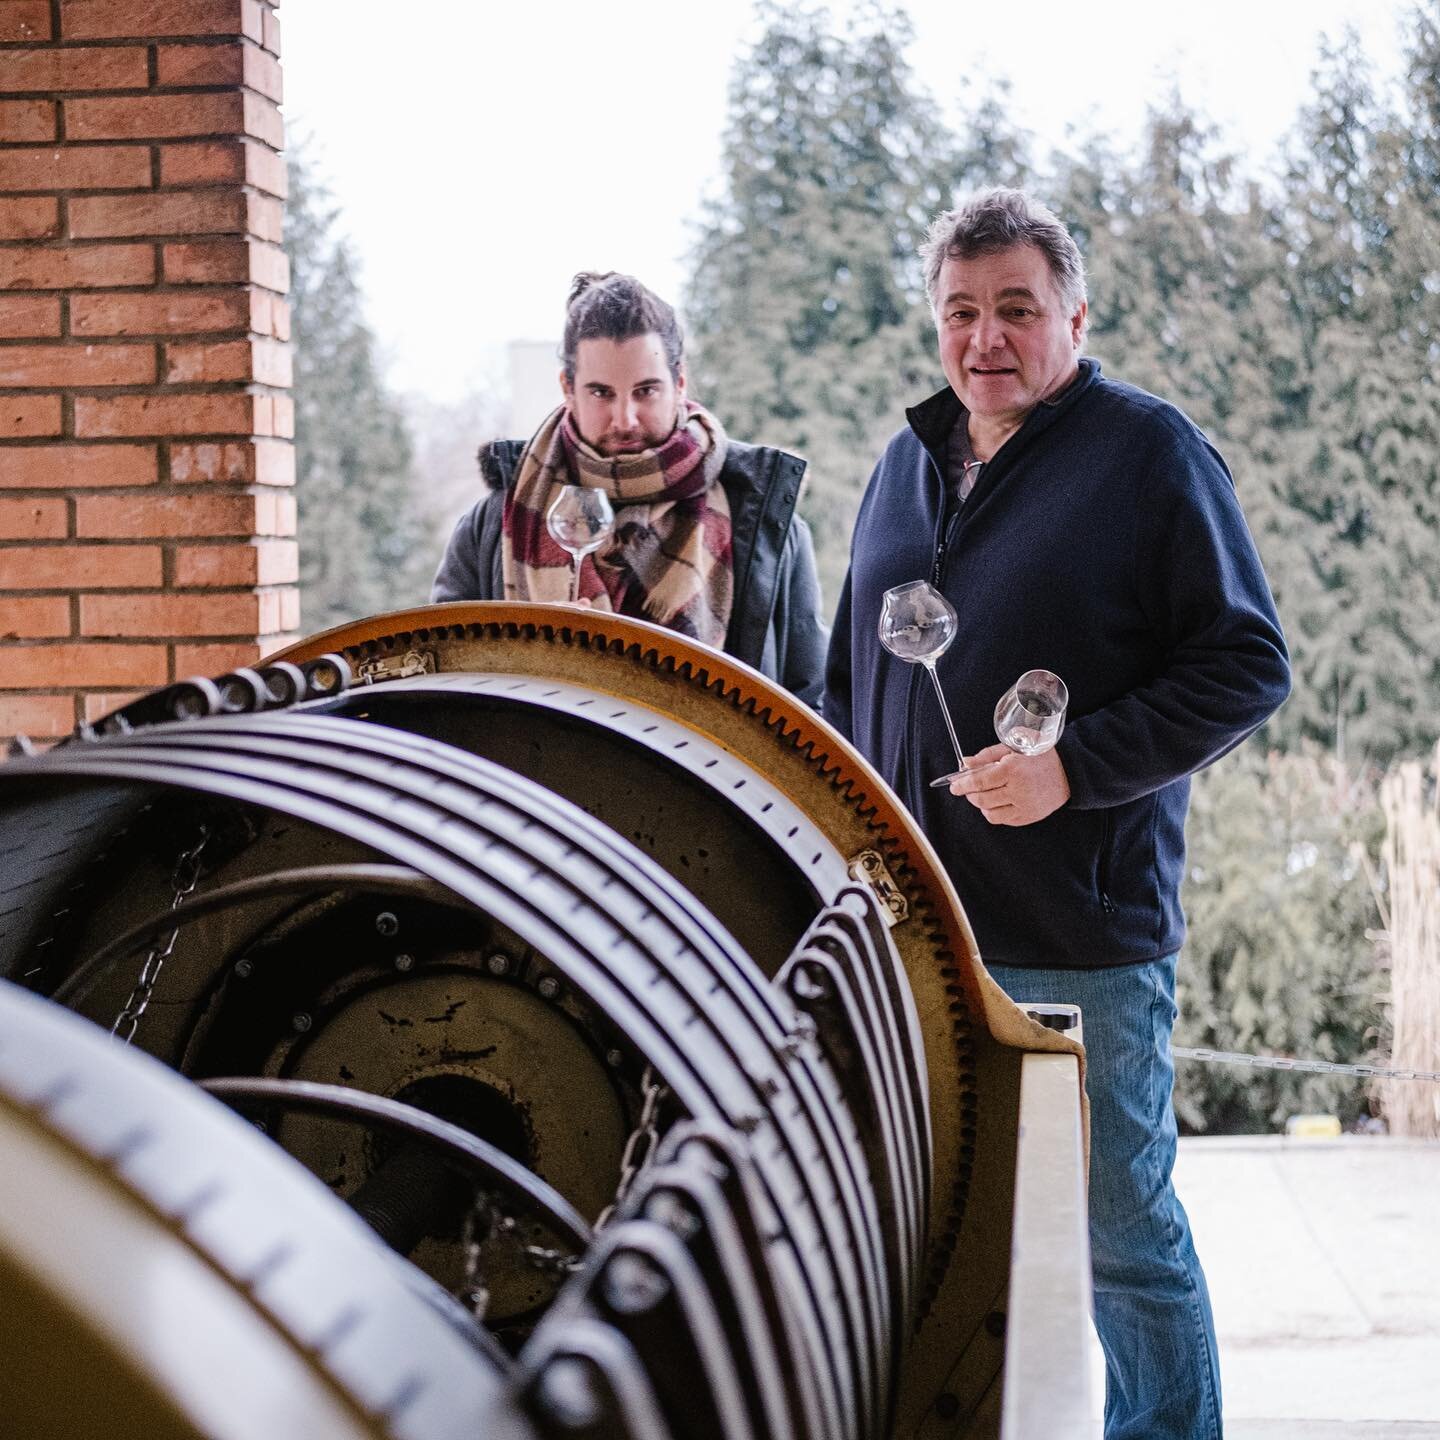 S&uuml;tő Zsolt | Strekov 1075| Slovakia 
Cellar work 

At harvest, the grapes arrive at the front of the winery, where they are either destemmed or used as whole bunches. 

Zsolt introduced a new pneumatic press for the vintage 2020 that ensures a s